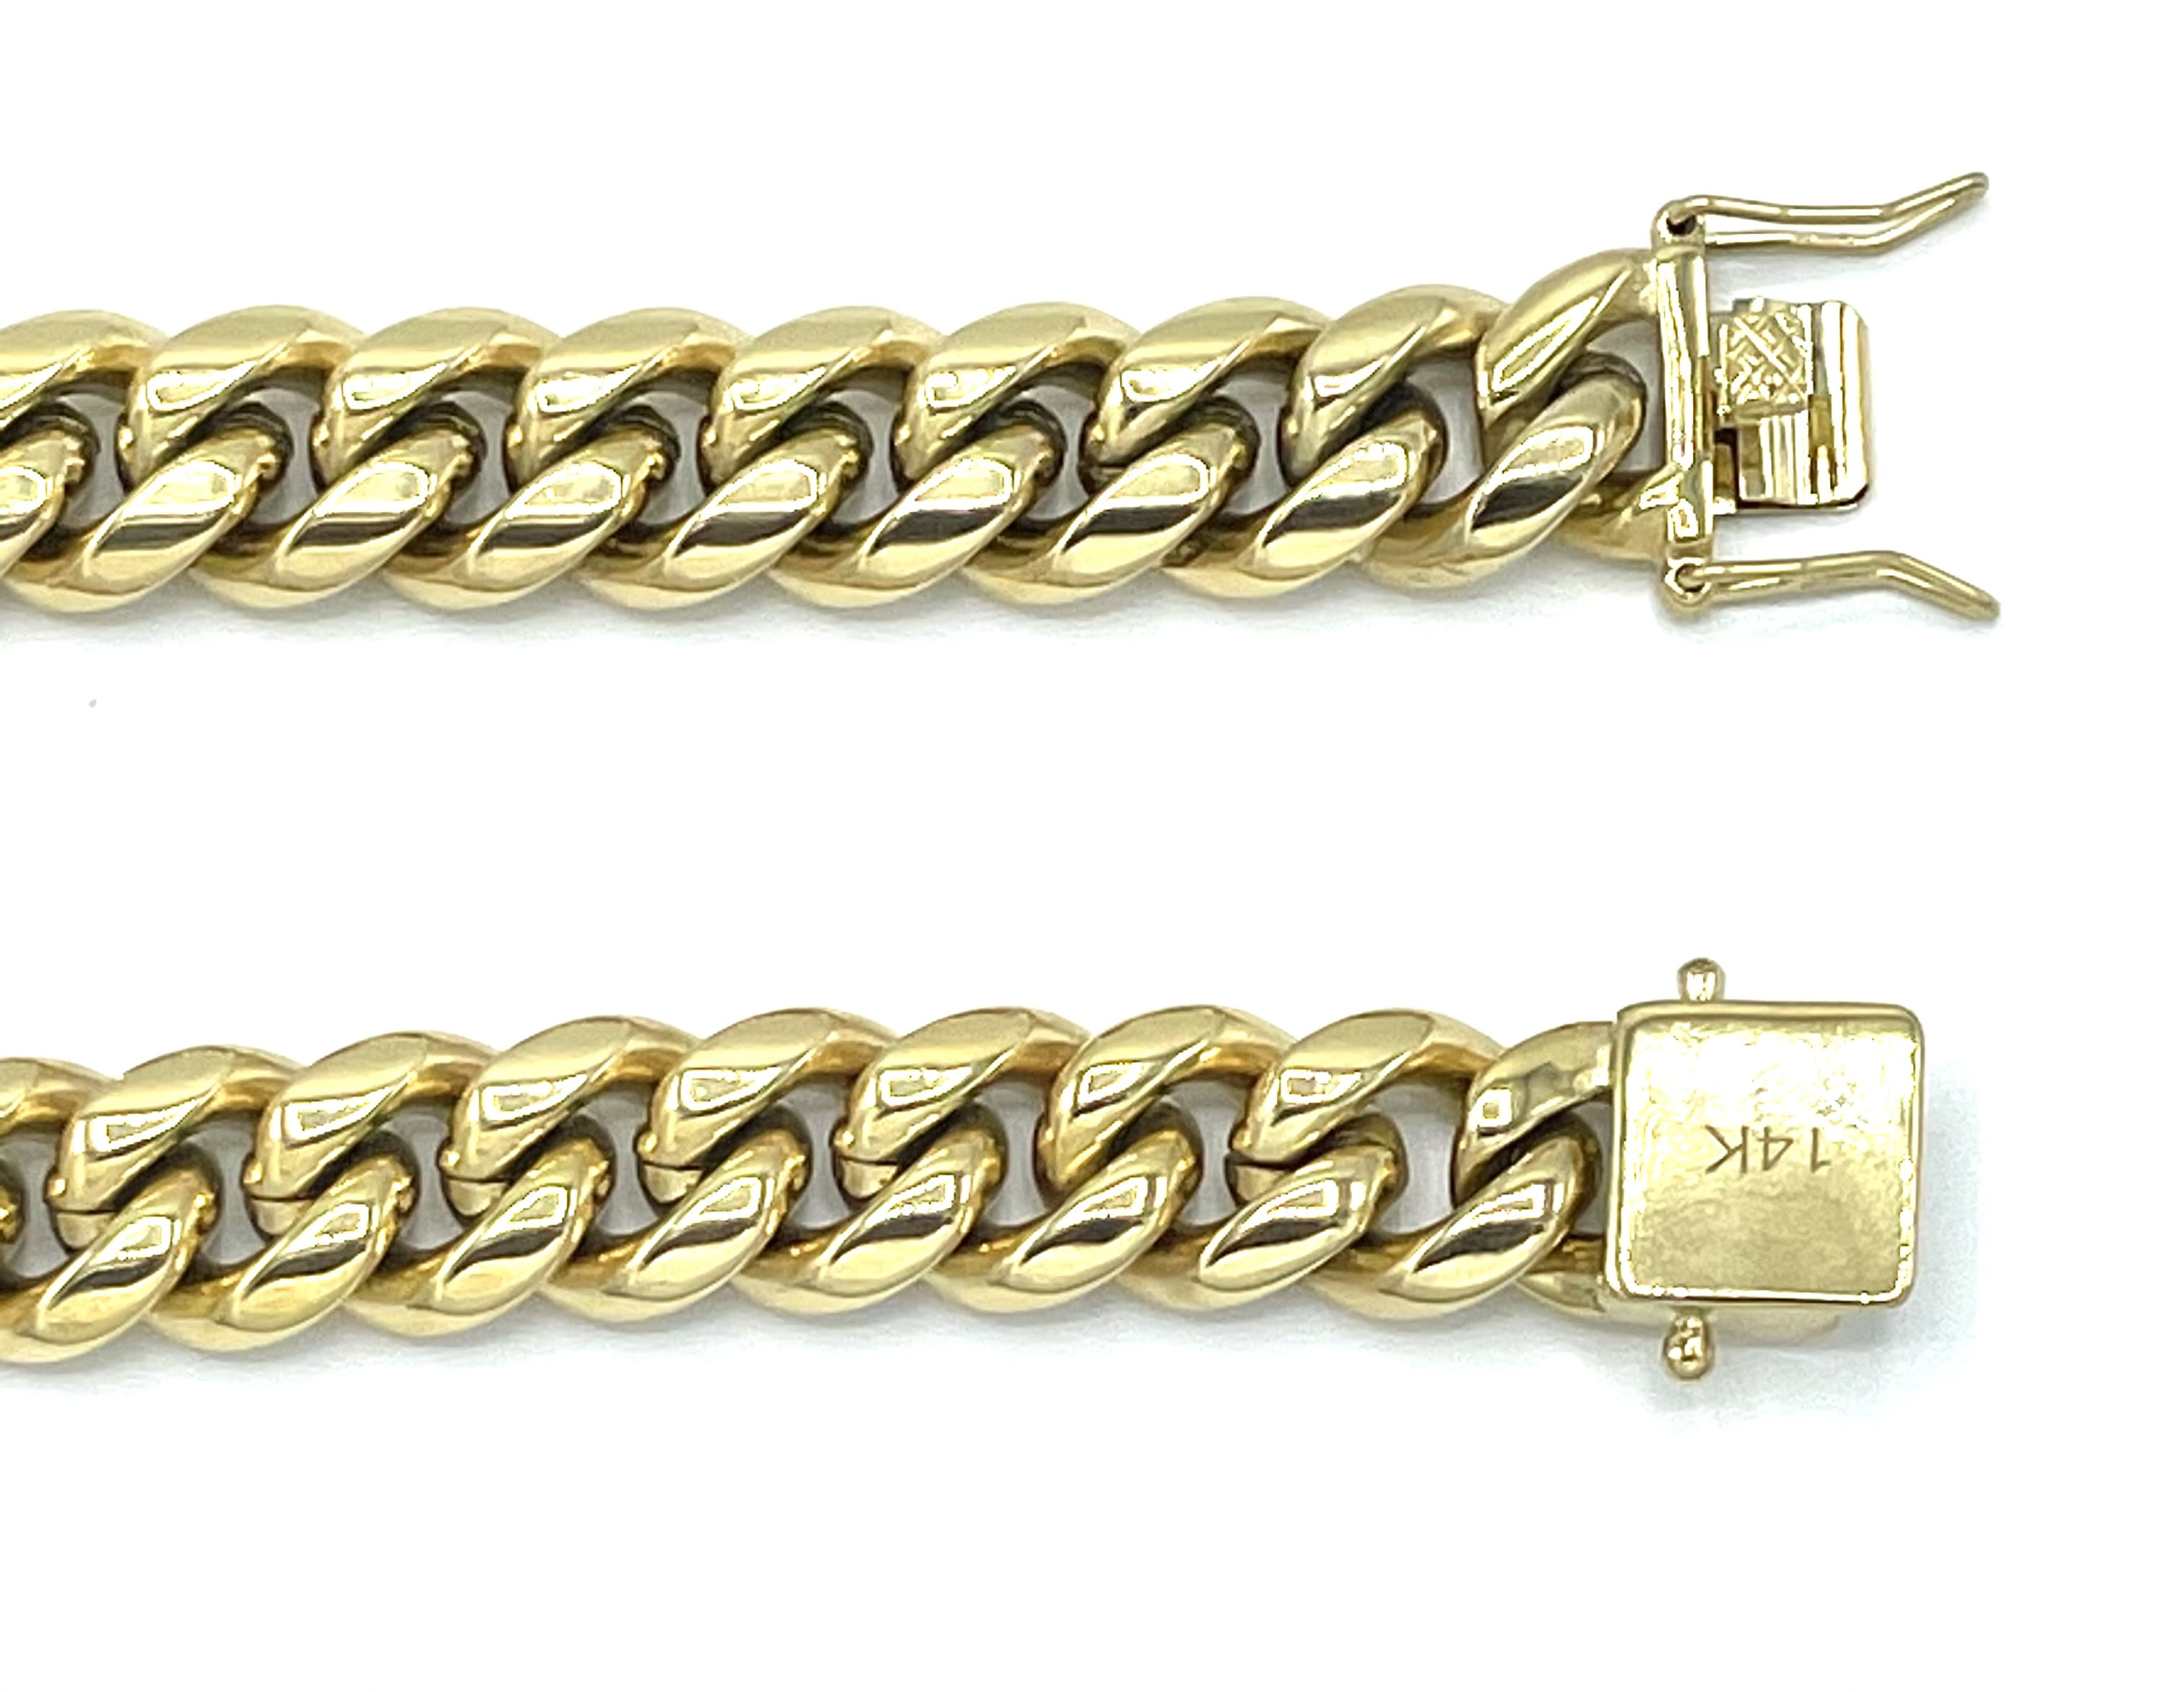 Gold Cuban Link Chain Necklace for Men Real 14MM 24K Karat Diamond Cut Heavy w Solid Thick Clasp US Made